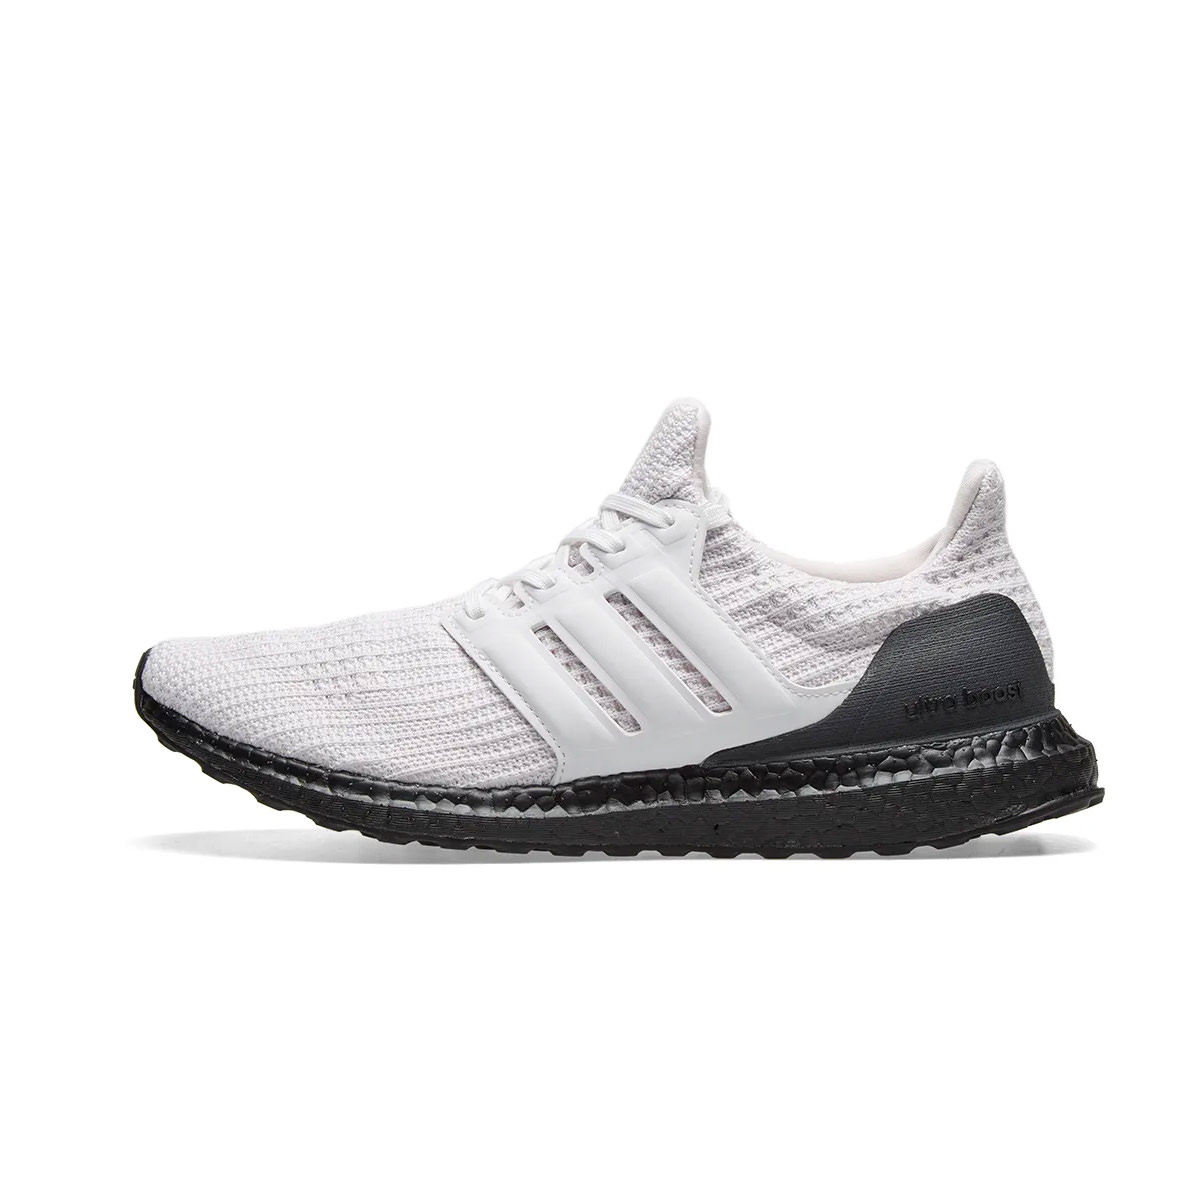 adidas orchid tint ultra boost